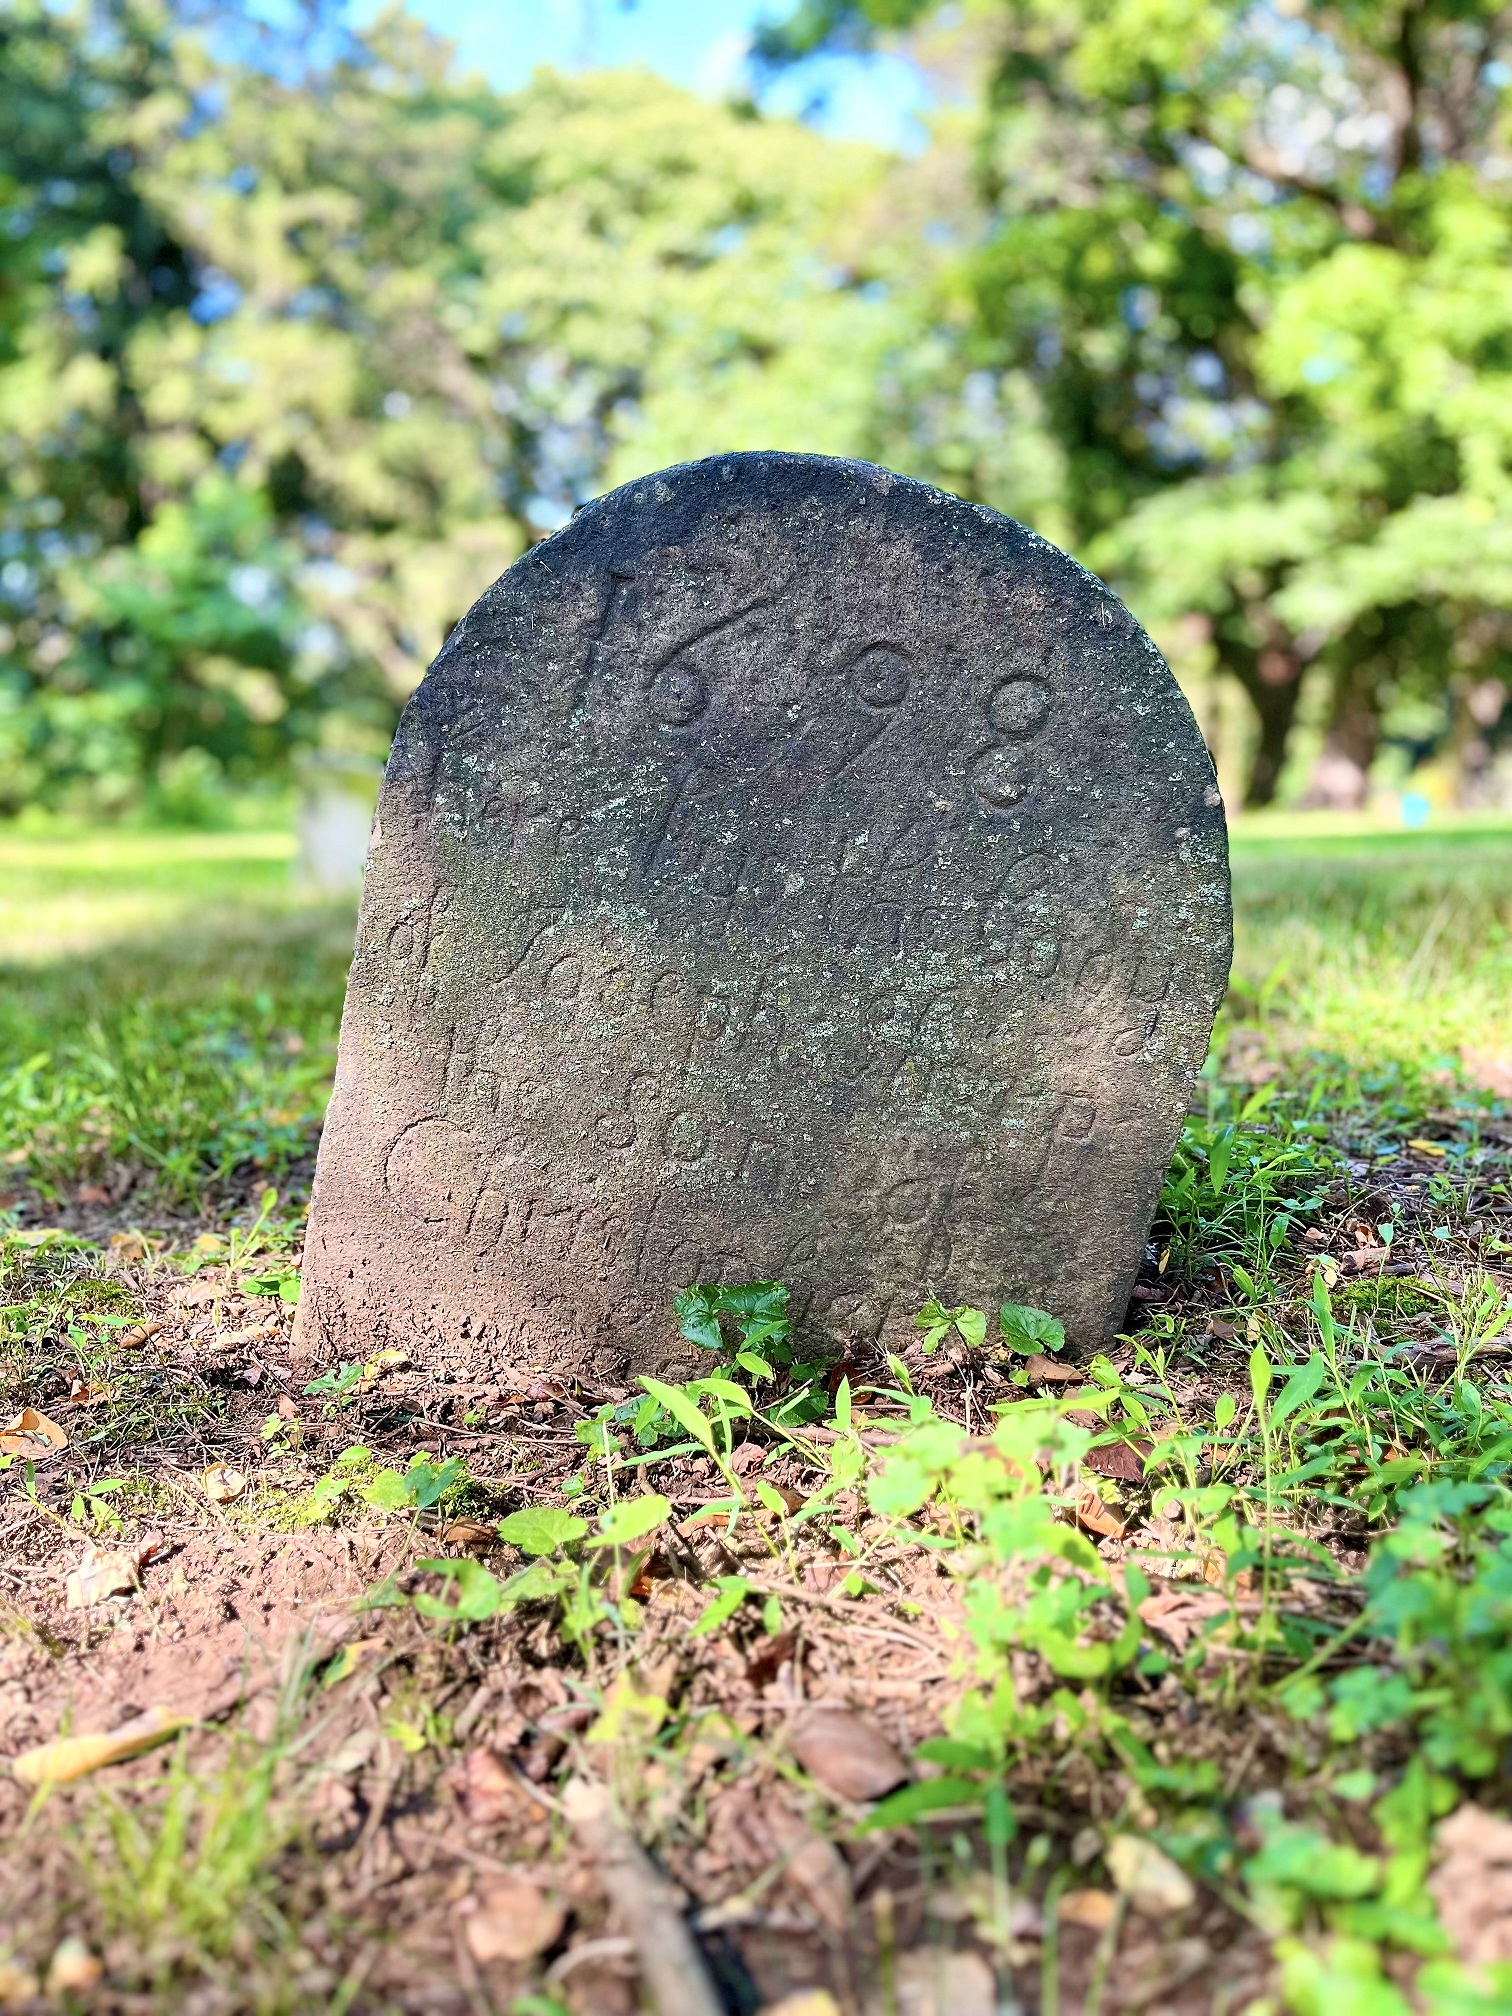 Rounded stone marker with writing set in ground.